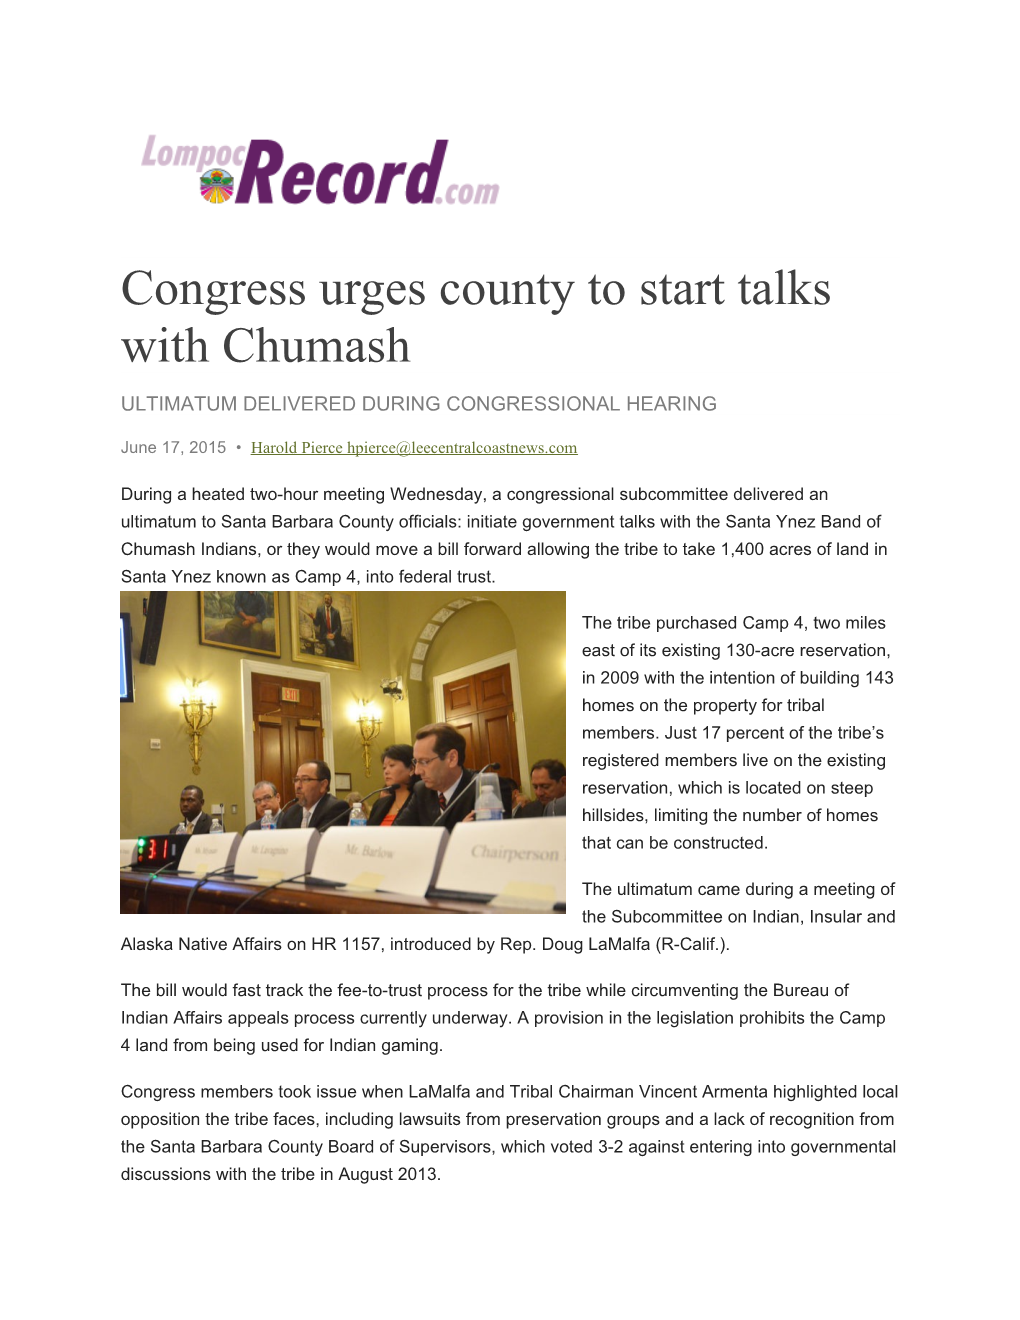 Congress Urges County to Start Talks with Chumash